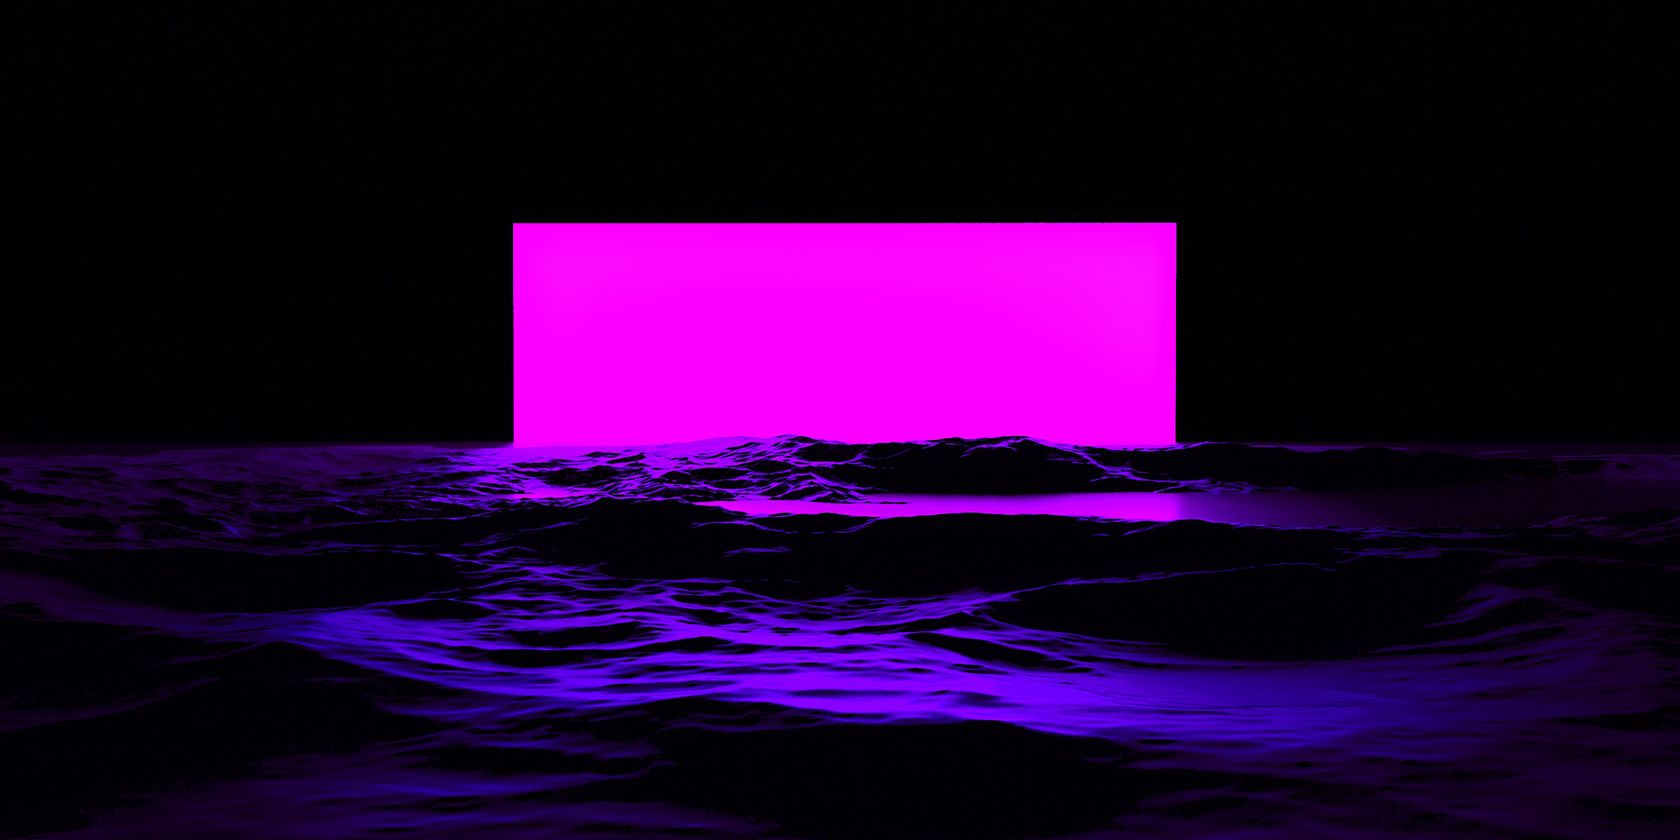 A magenta screen rising from the void.